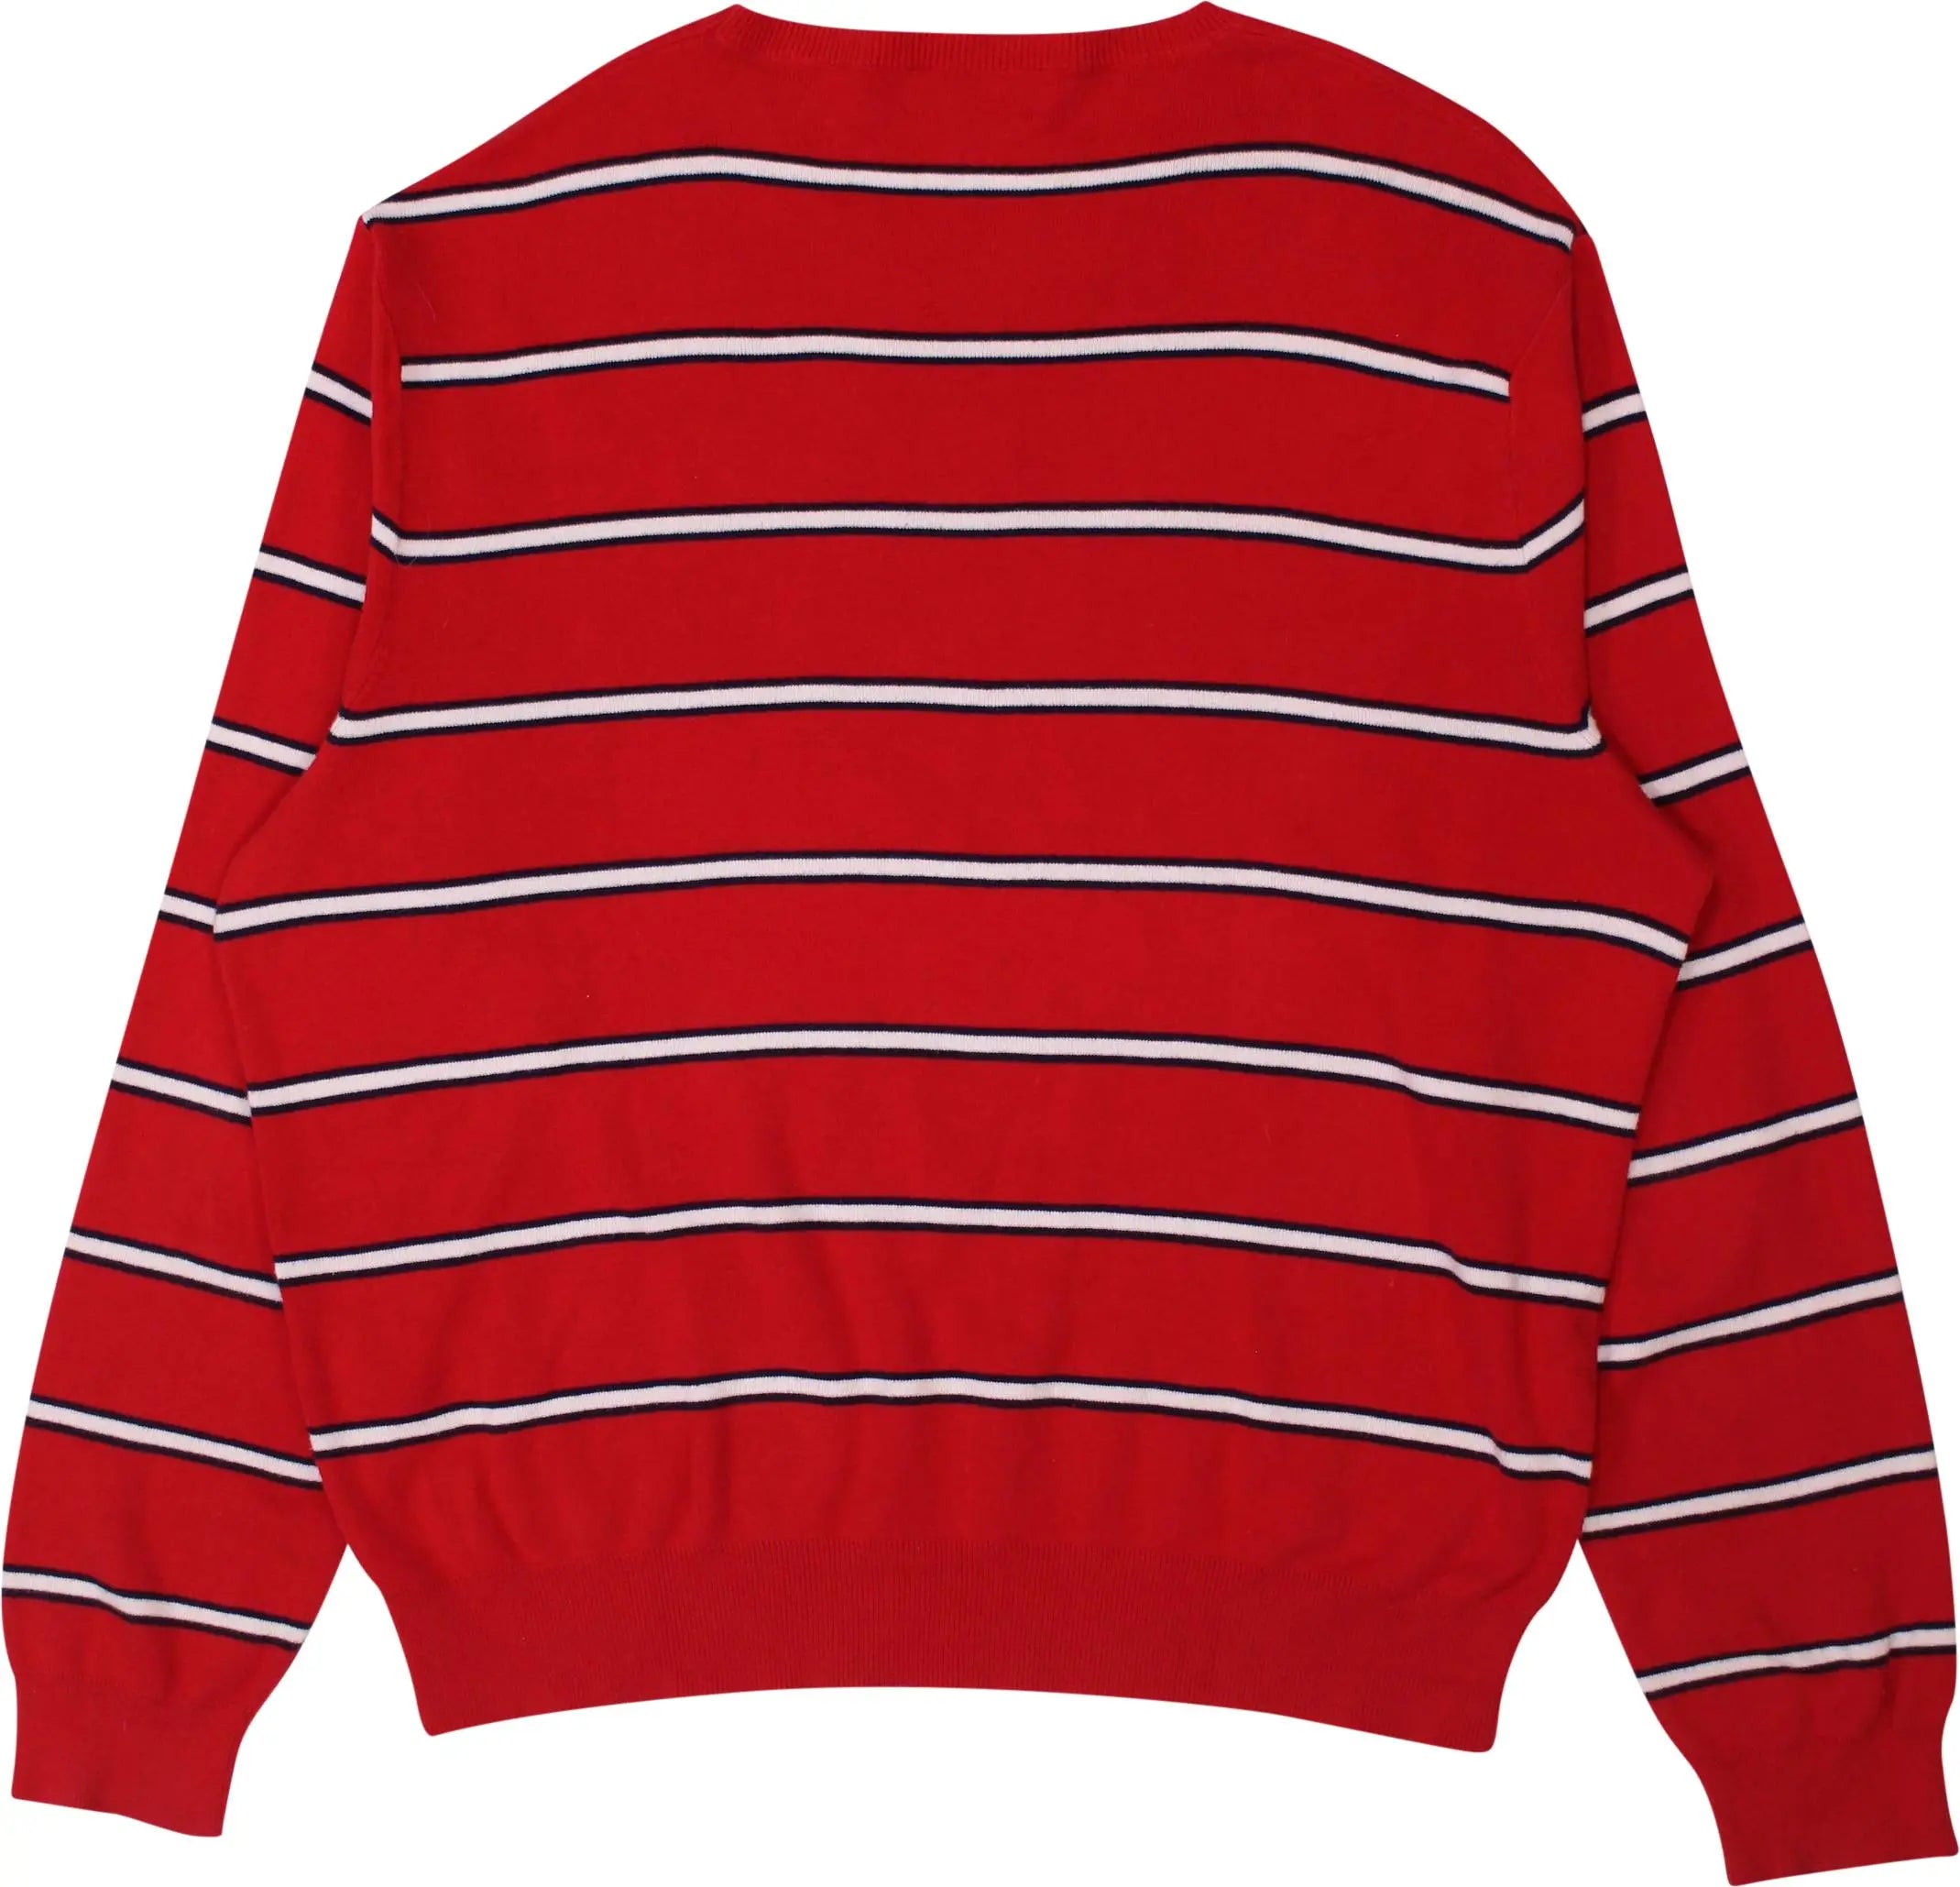 Ralph Lauren - Red sweater By Ralph Lauren- ThriftTale.com - Vintage and second handclothing